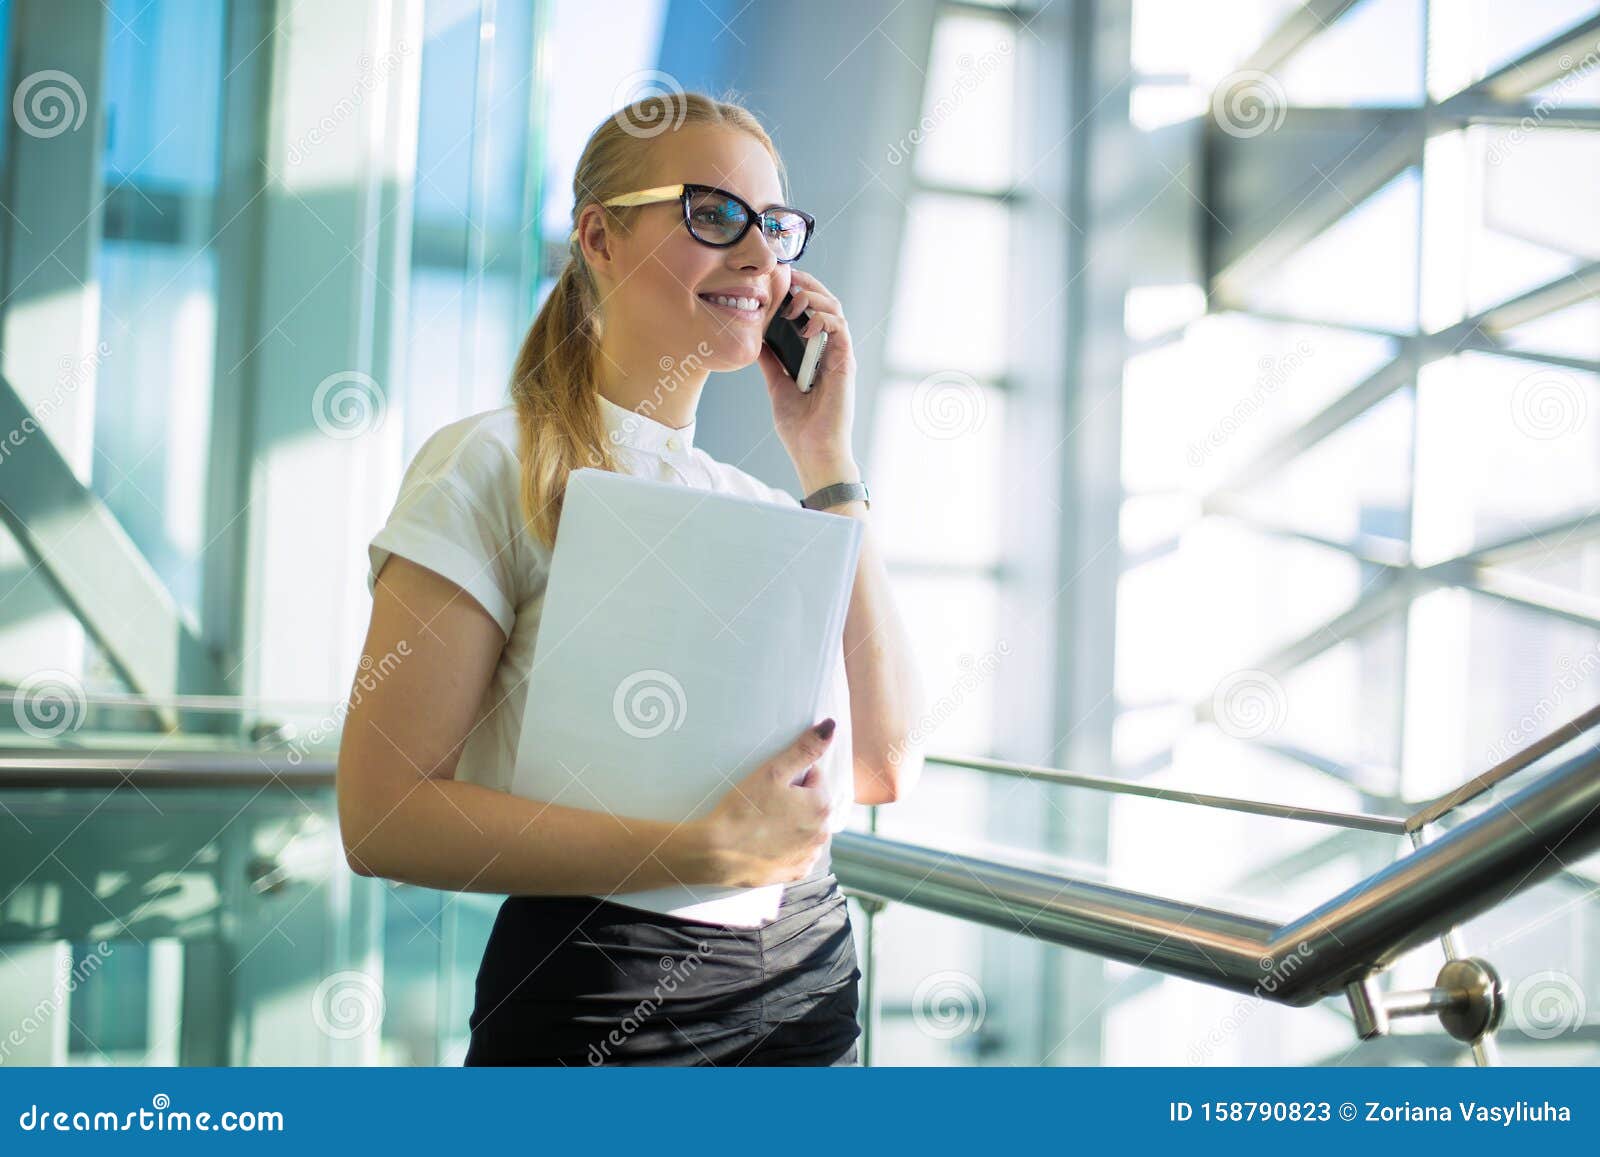 smiling woman professional jurist in formal wear and paper documents in hand having pleasant mobile phone conversation